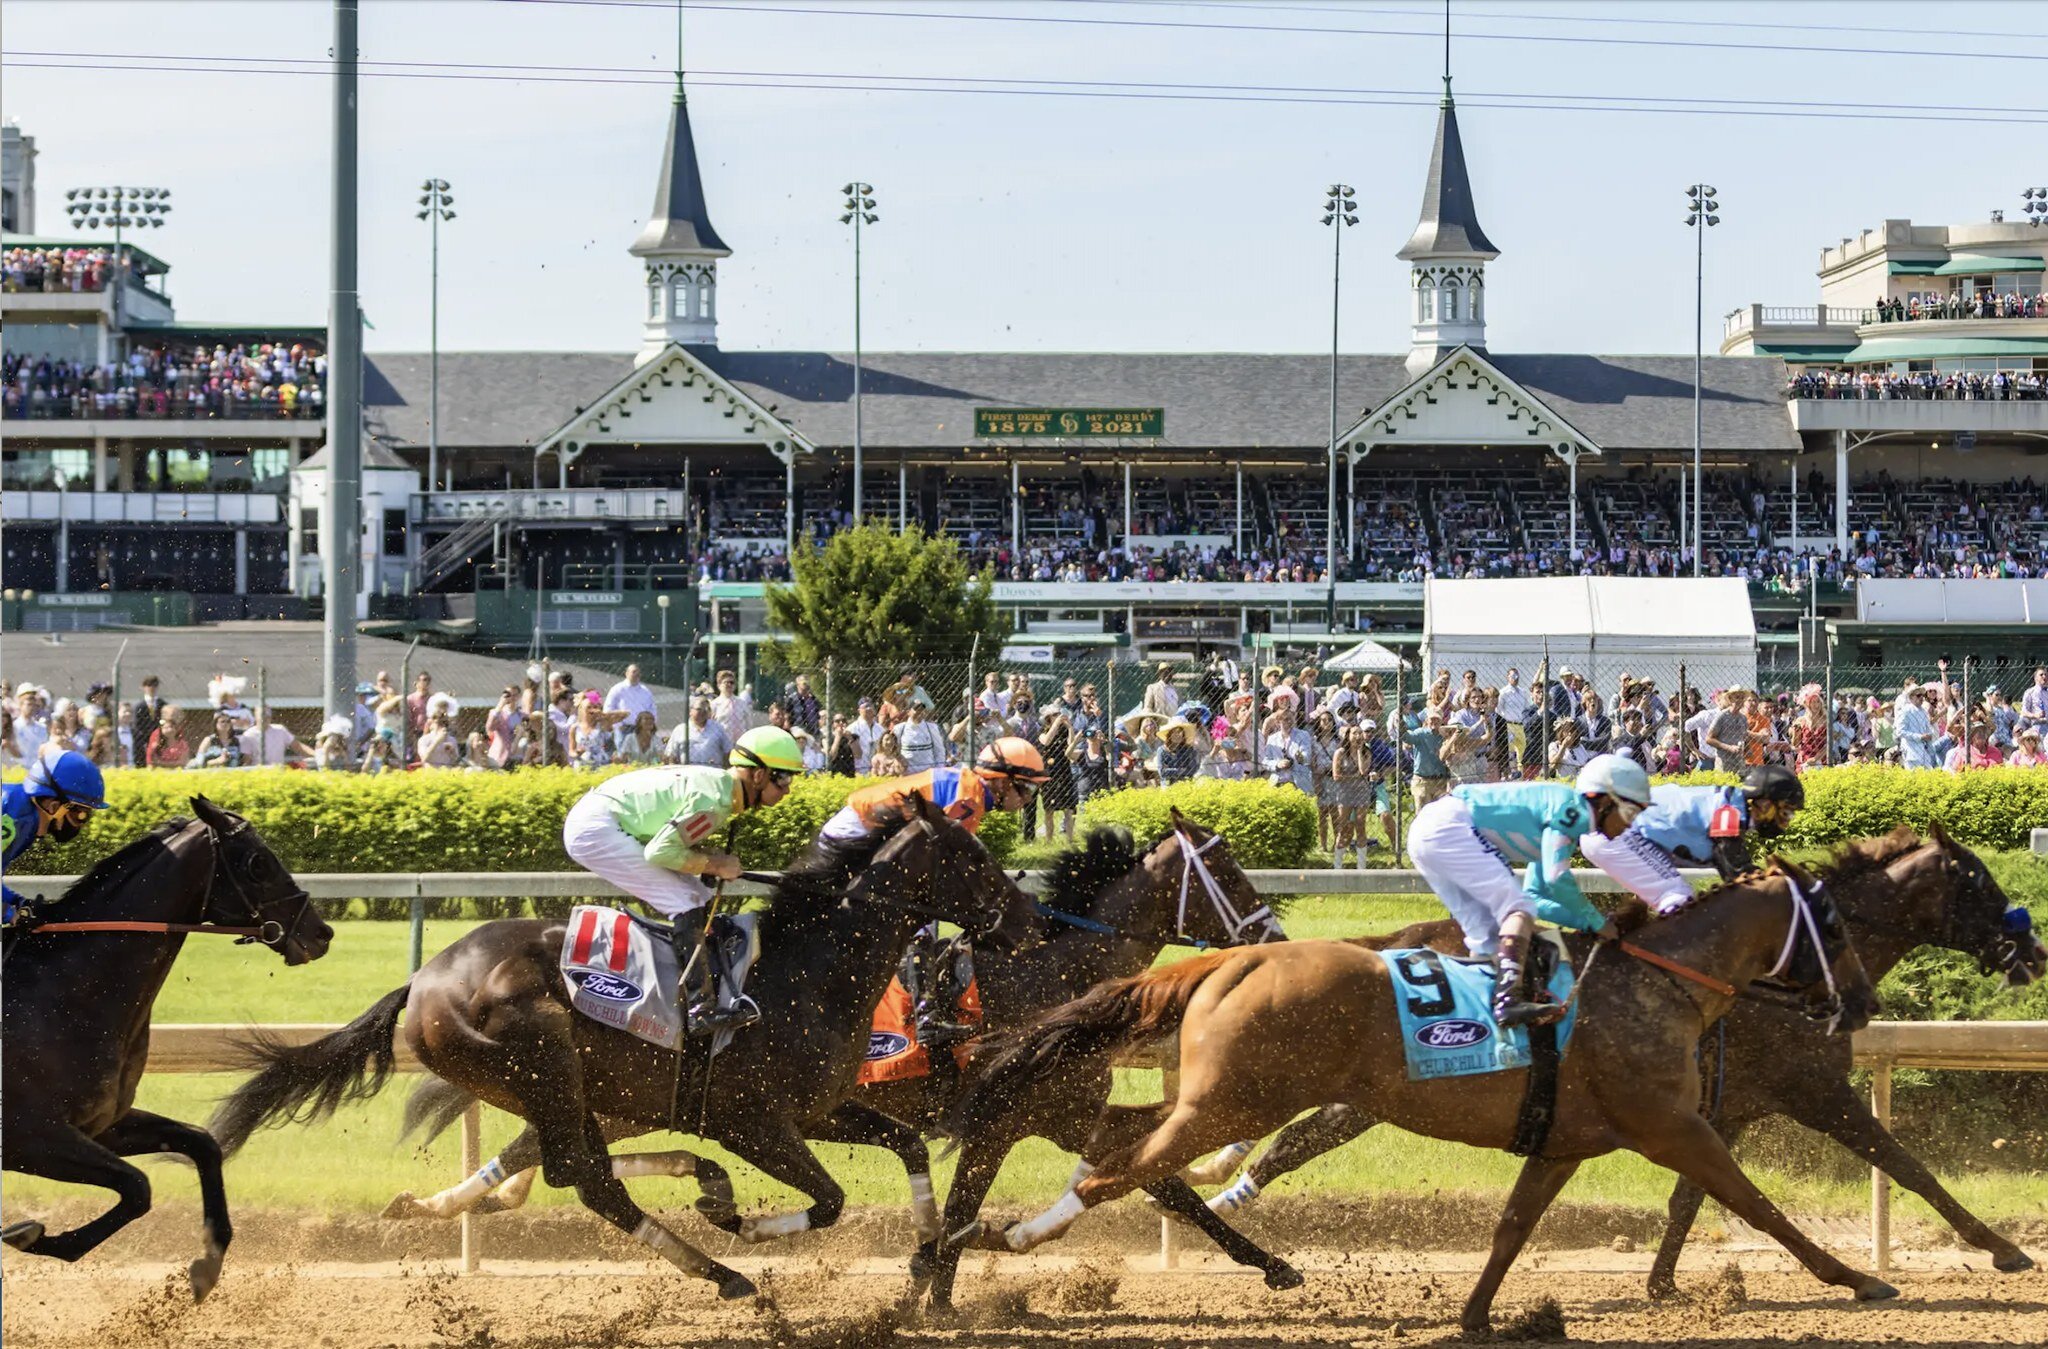 Montpelier Races are 6 months away but tomorrow is the 149th consecutive running of the Kentucky Derby! 

Proclaimed the most exciting two minutes in sports it is guaranteed to deliver tradition, great stories and excitement! NBC will cover the Run f